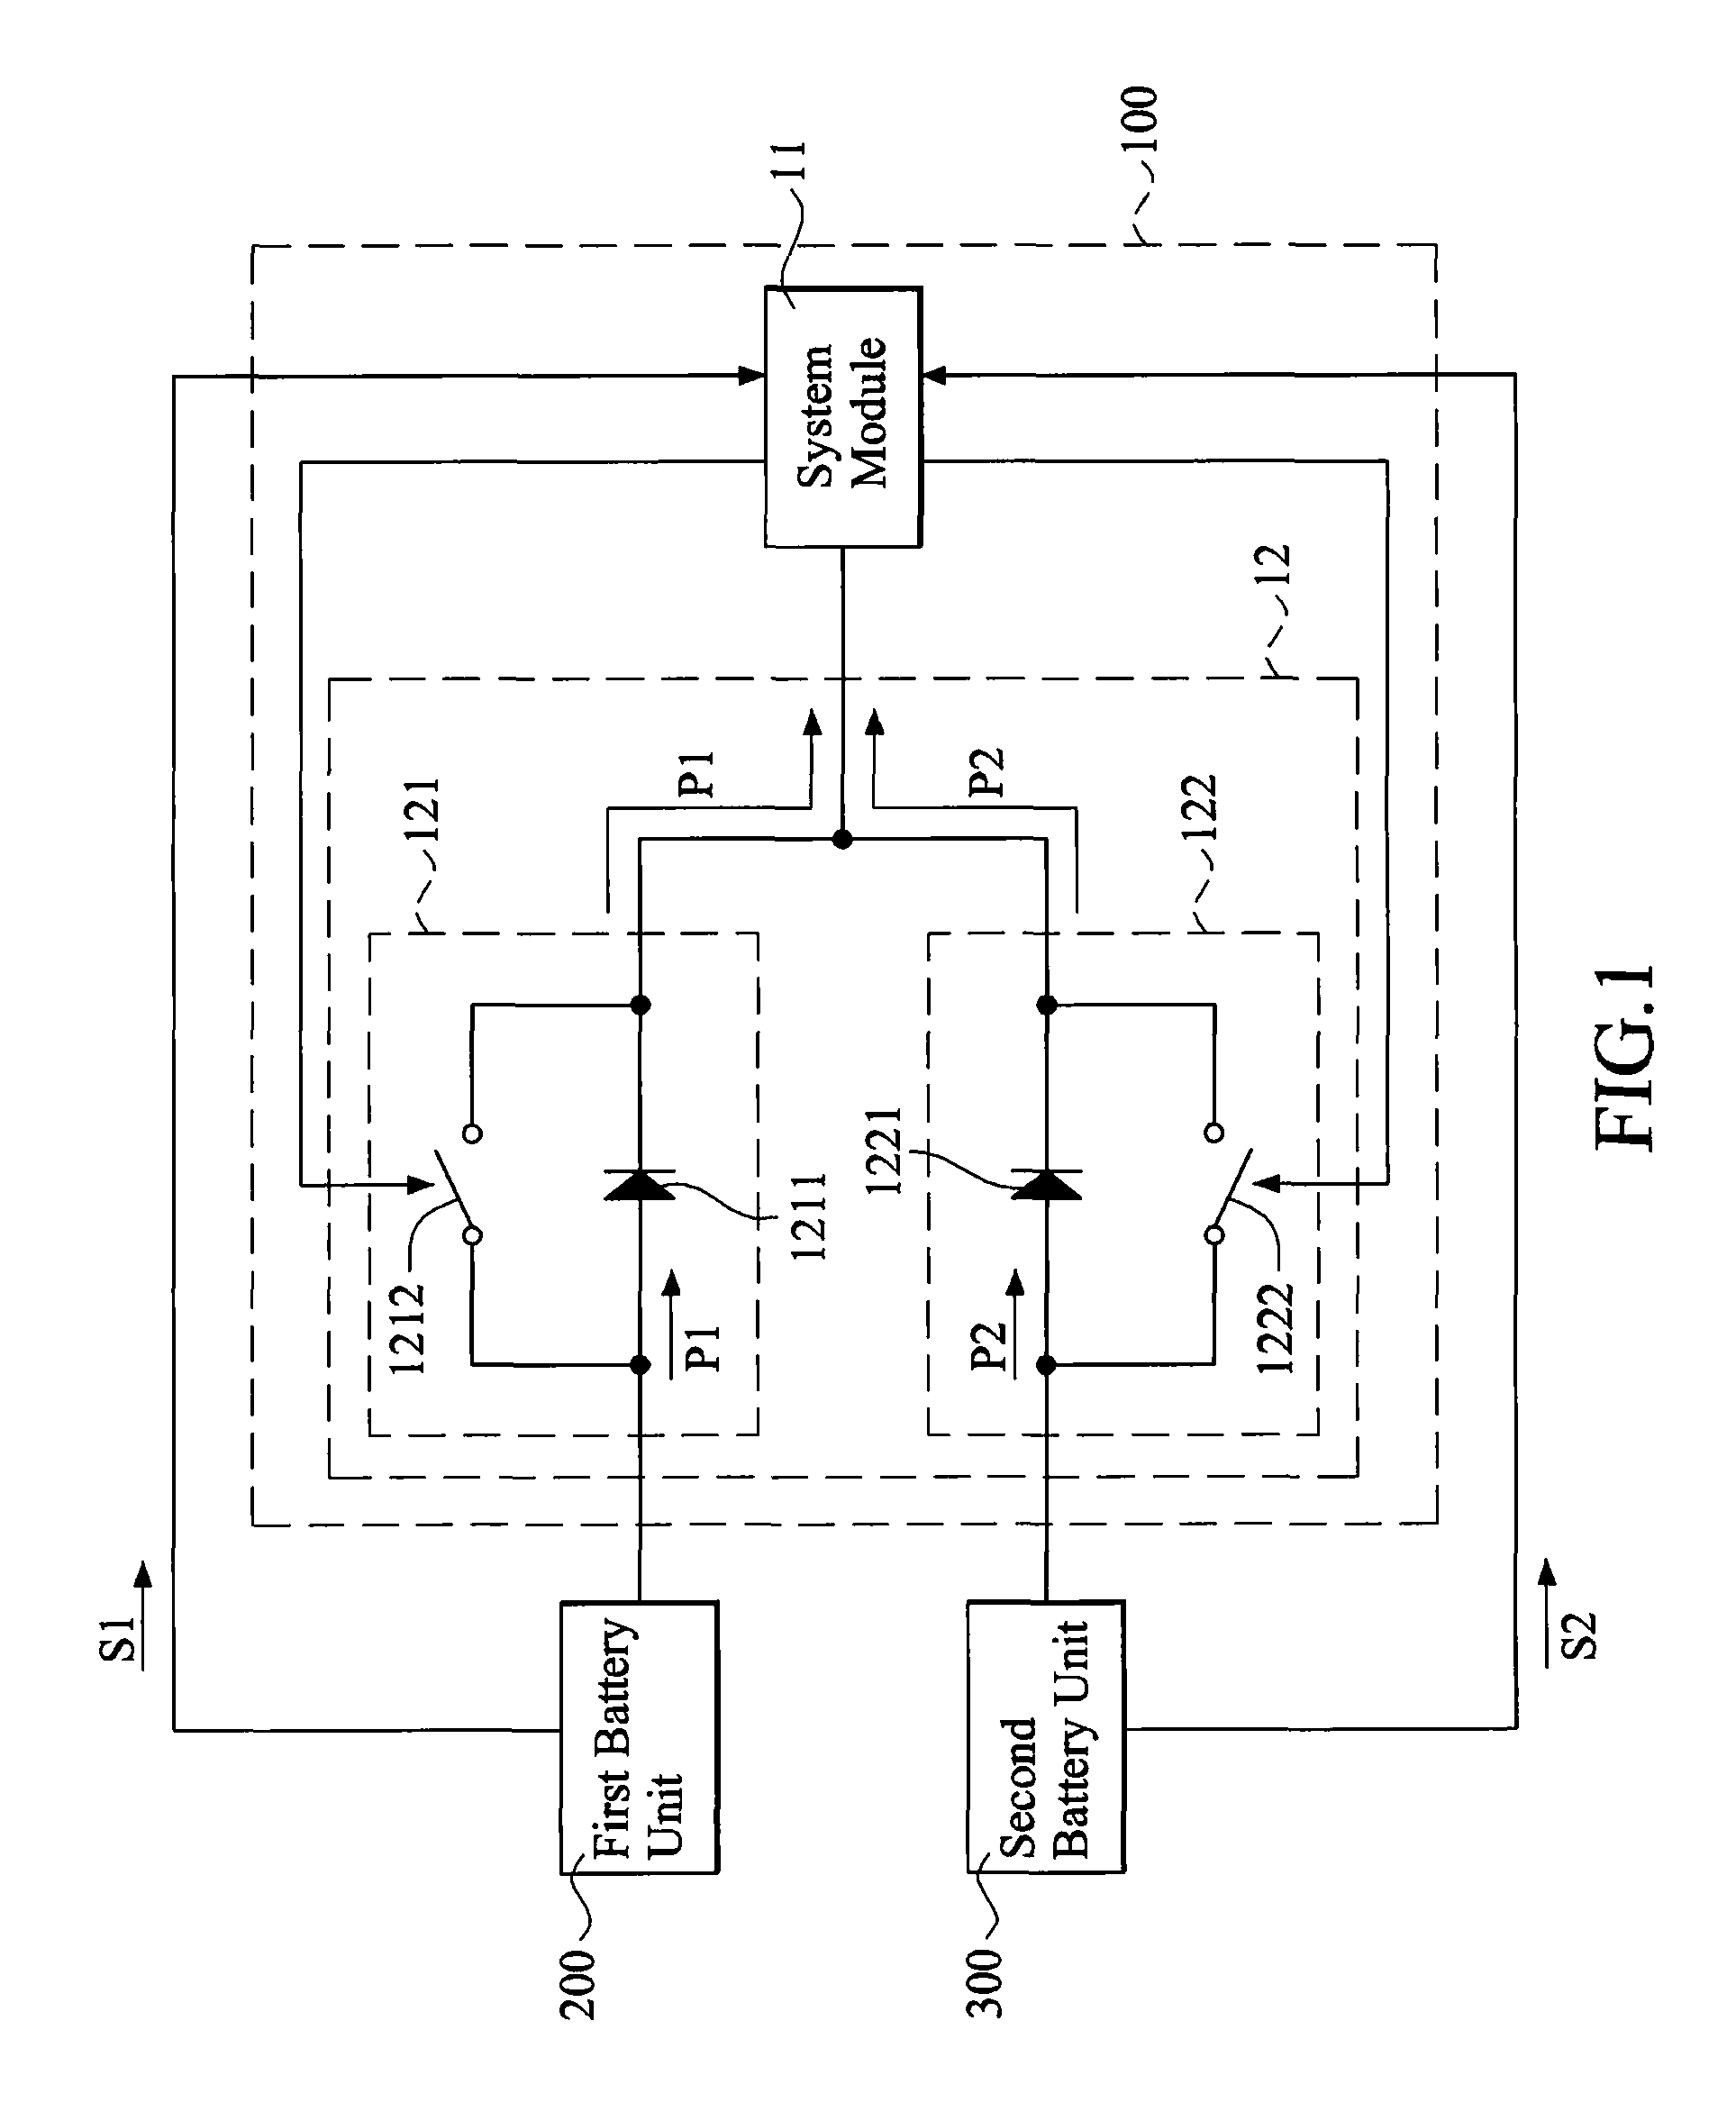 Electronic assembly provided with a parallel circuit for connecting electrically to two battery units